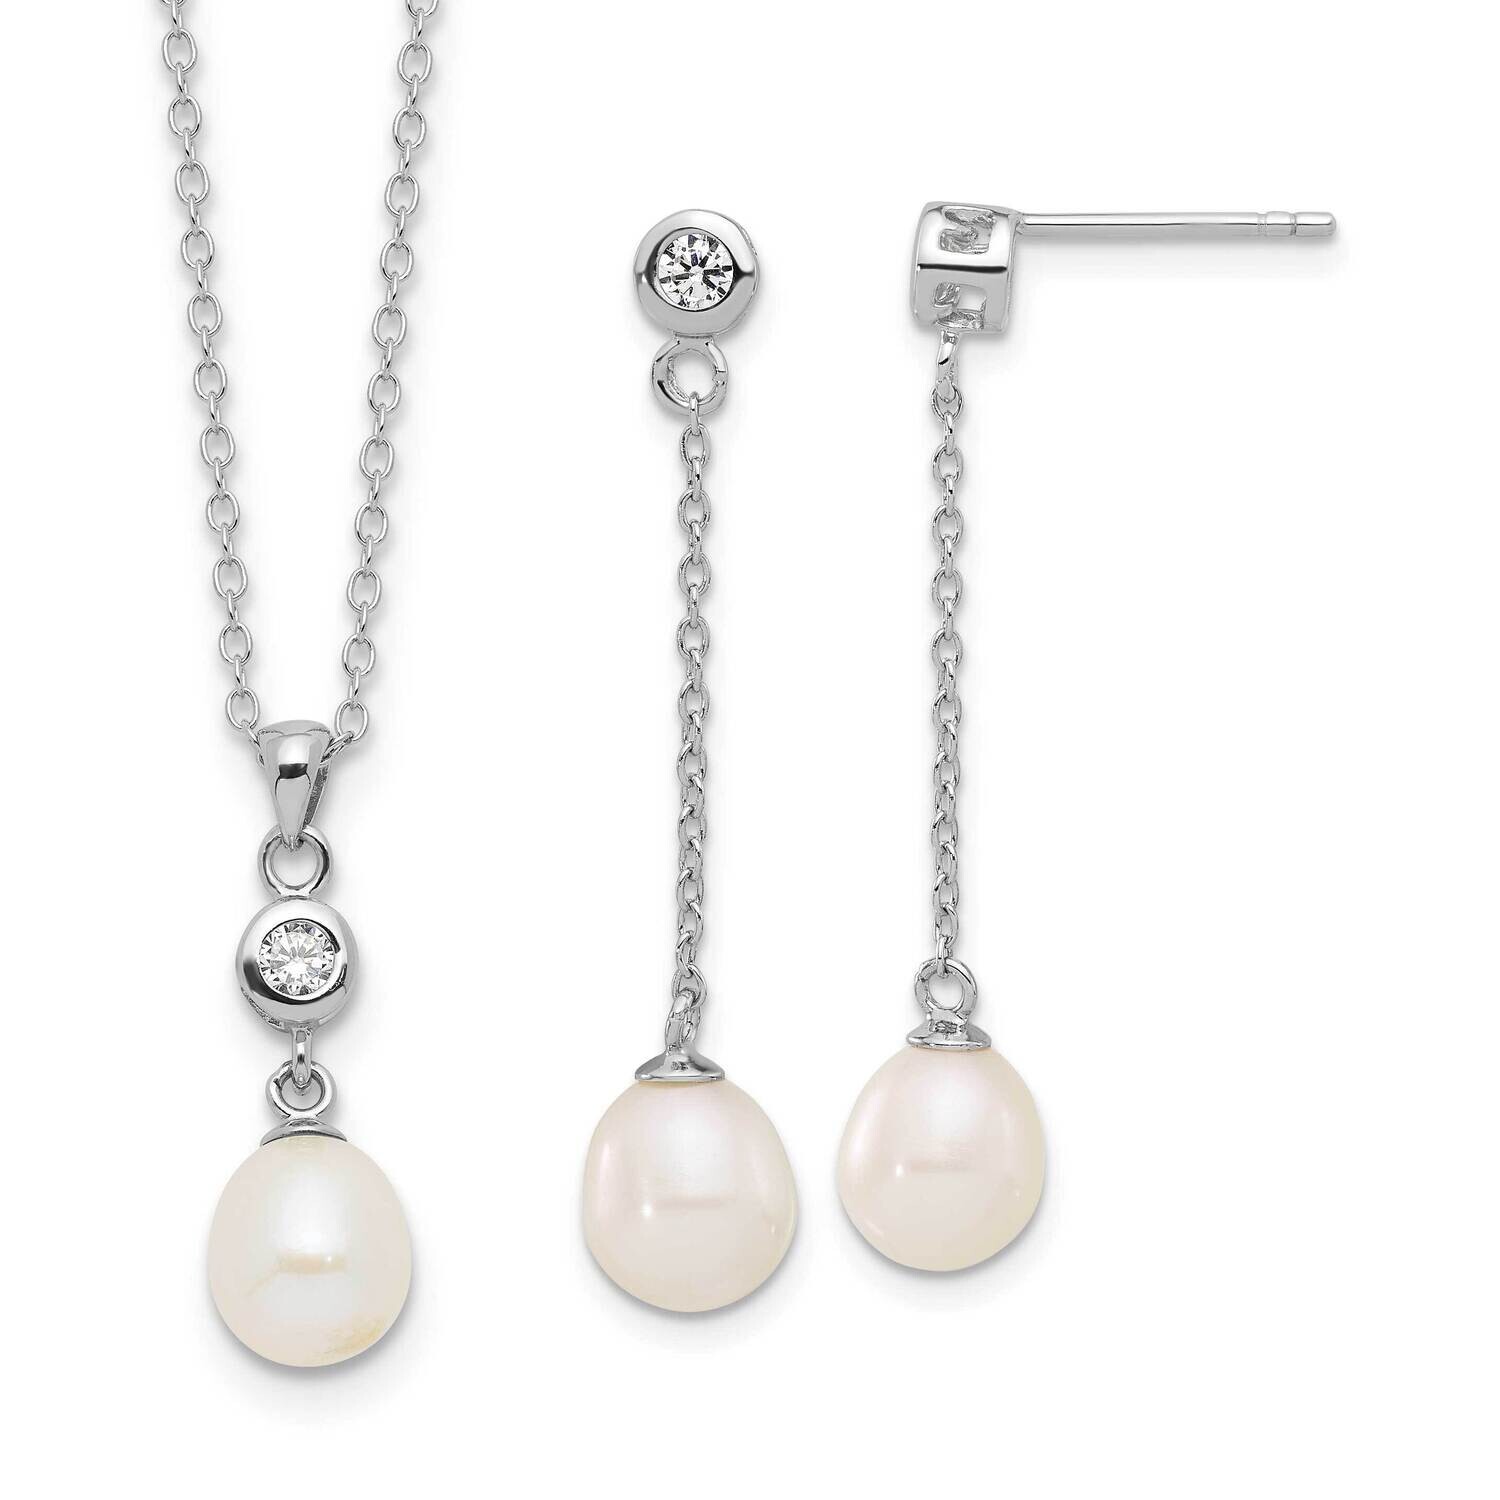 Rh-Plated 7-8mm Fwc Pearl CZ 17 Inch Necklace Earrings Set Sterling Silver QH5815SET